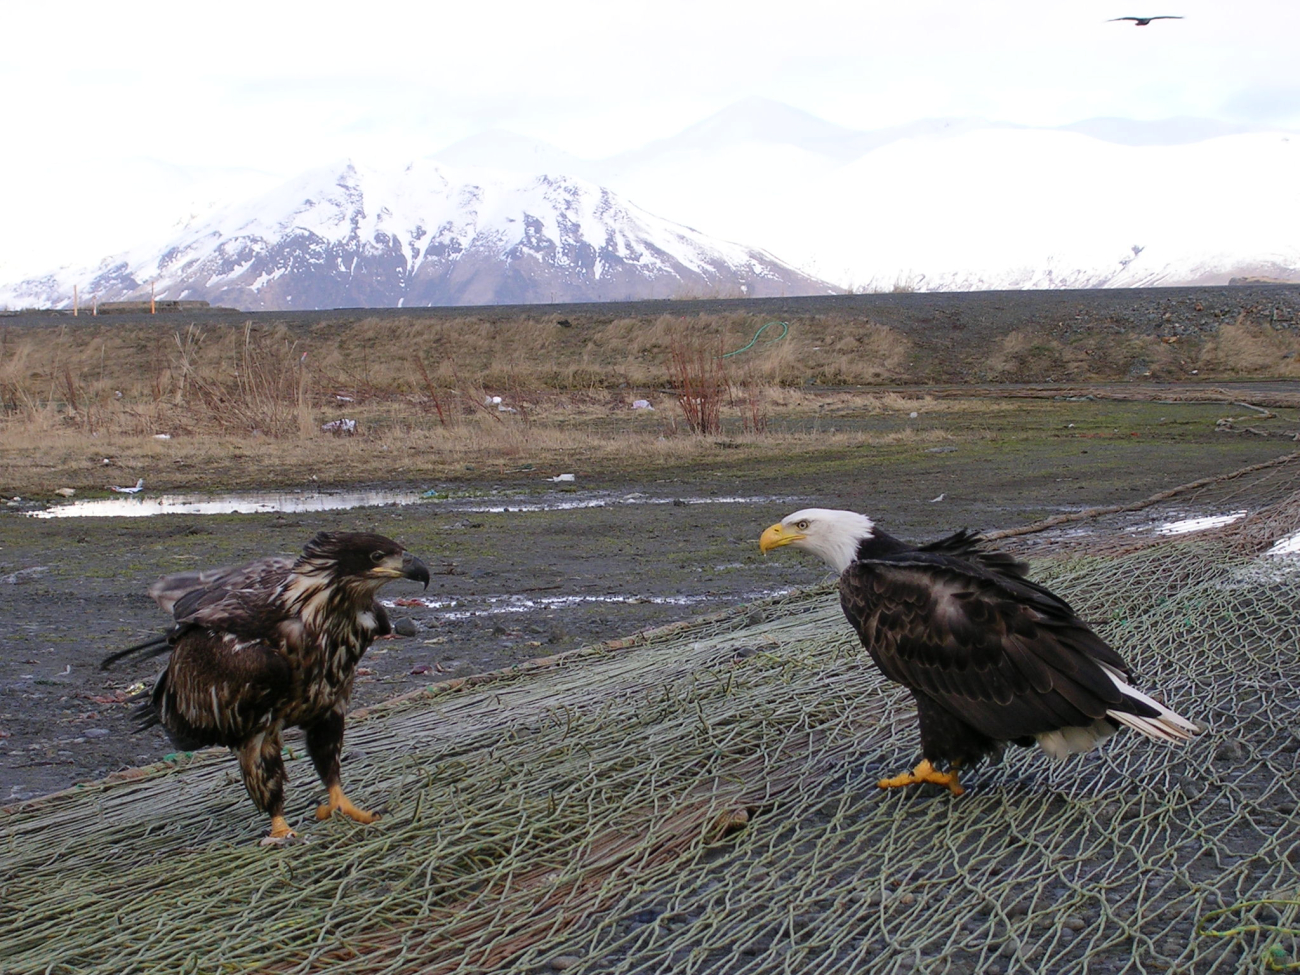 Mature bald eagle and young bald eagle scavenging the left overs onnets left out to dry